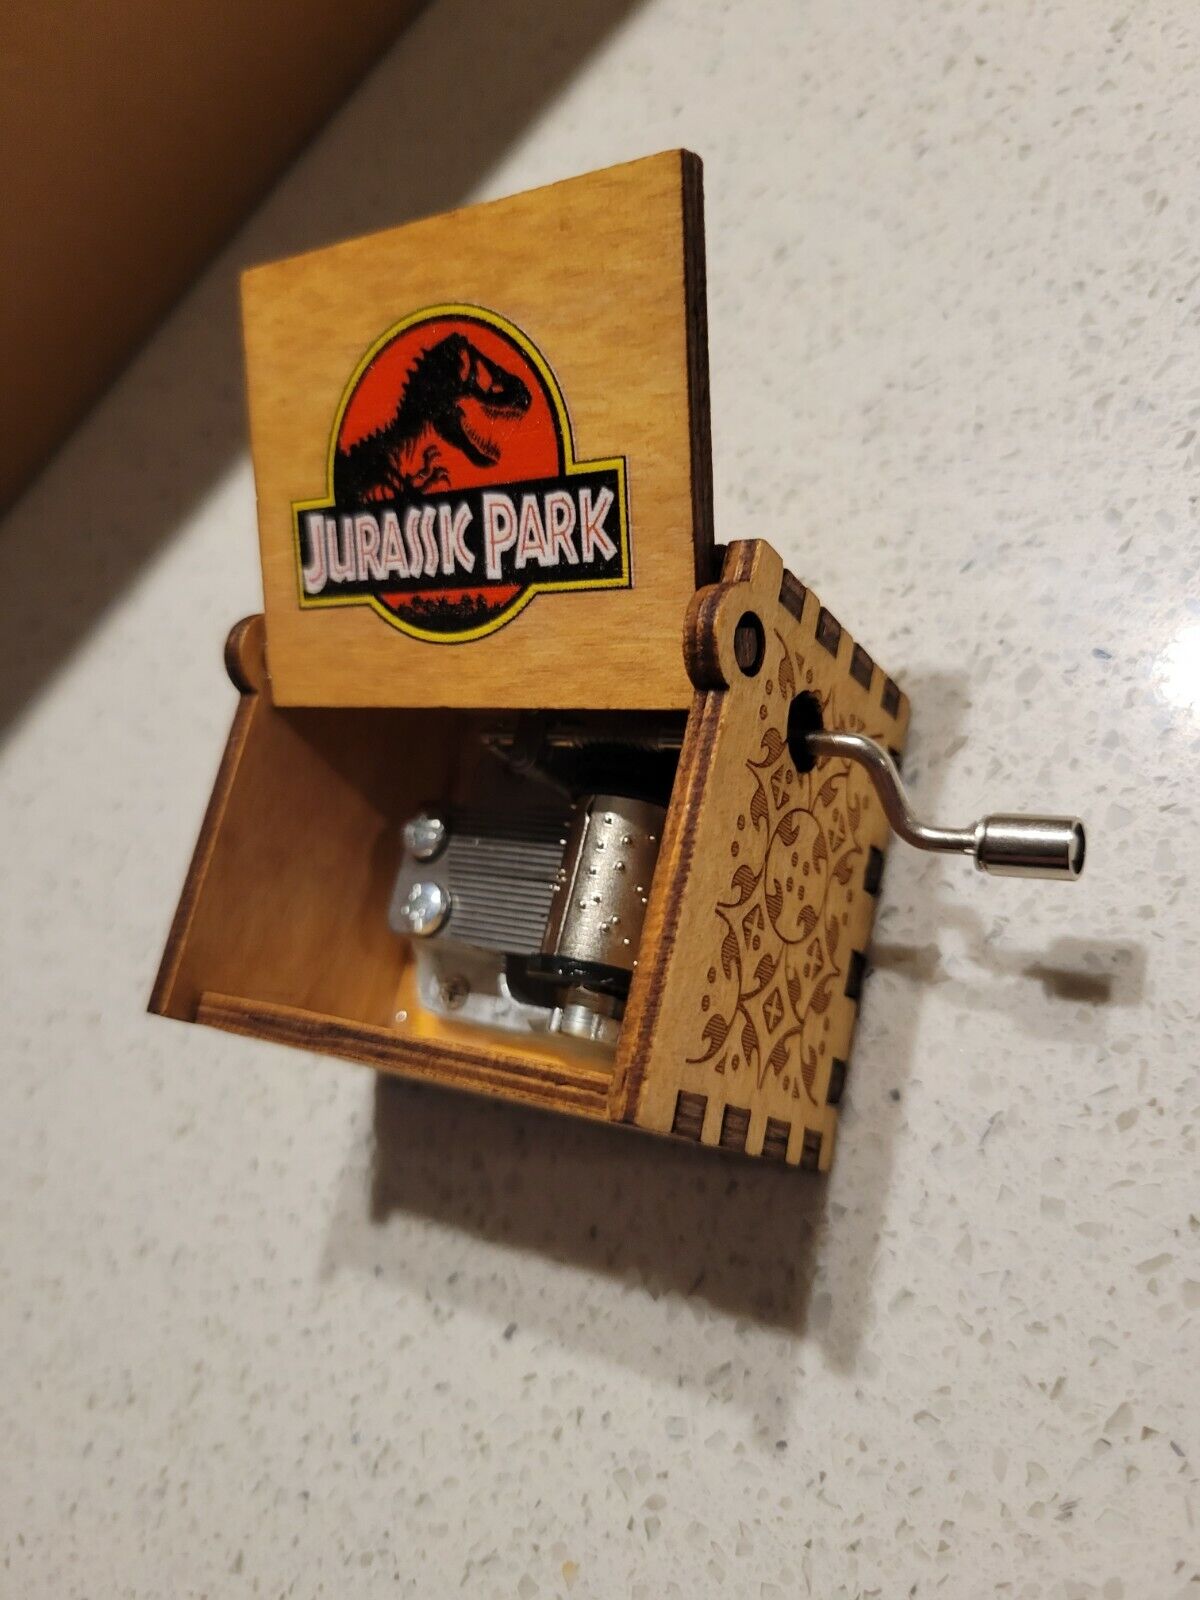 Jurassic Park Music New In Box Wood plays Theme song